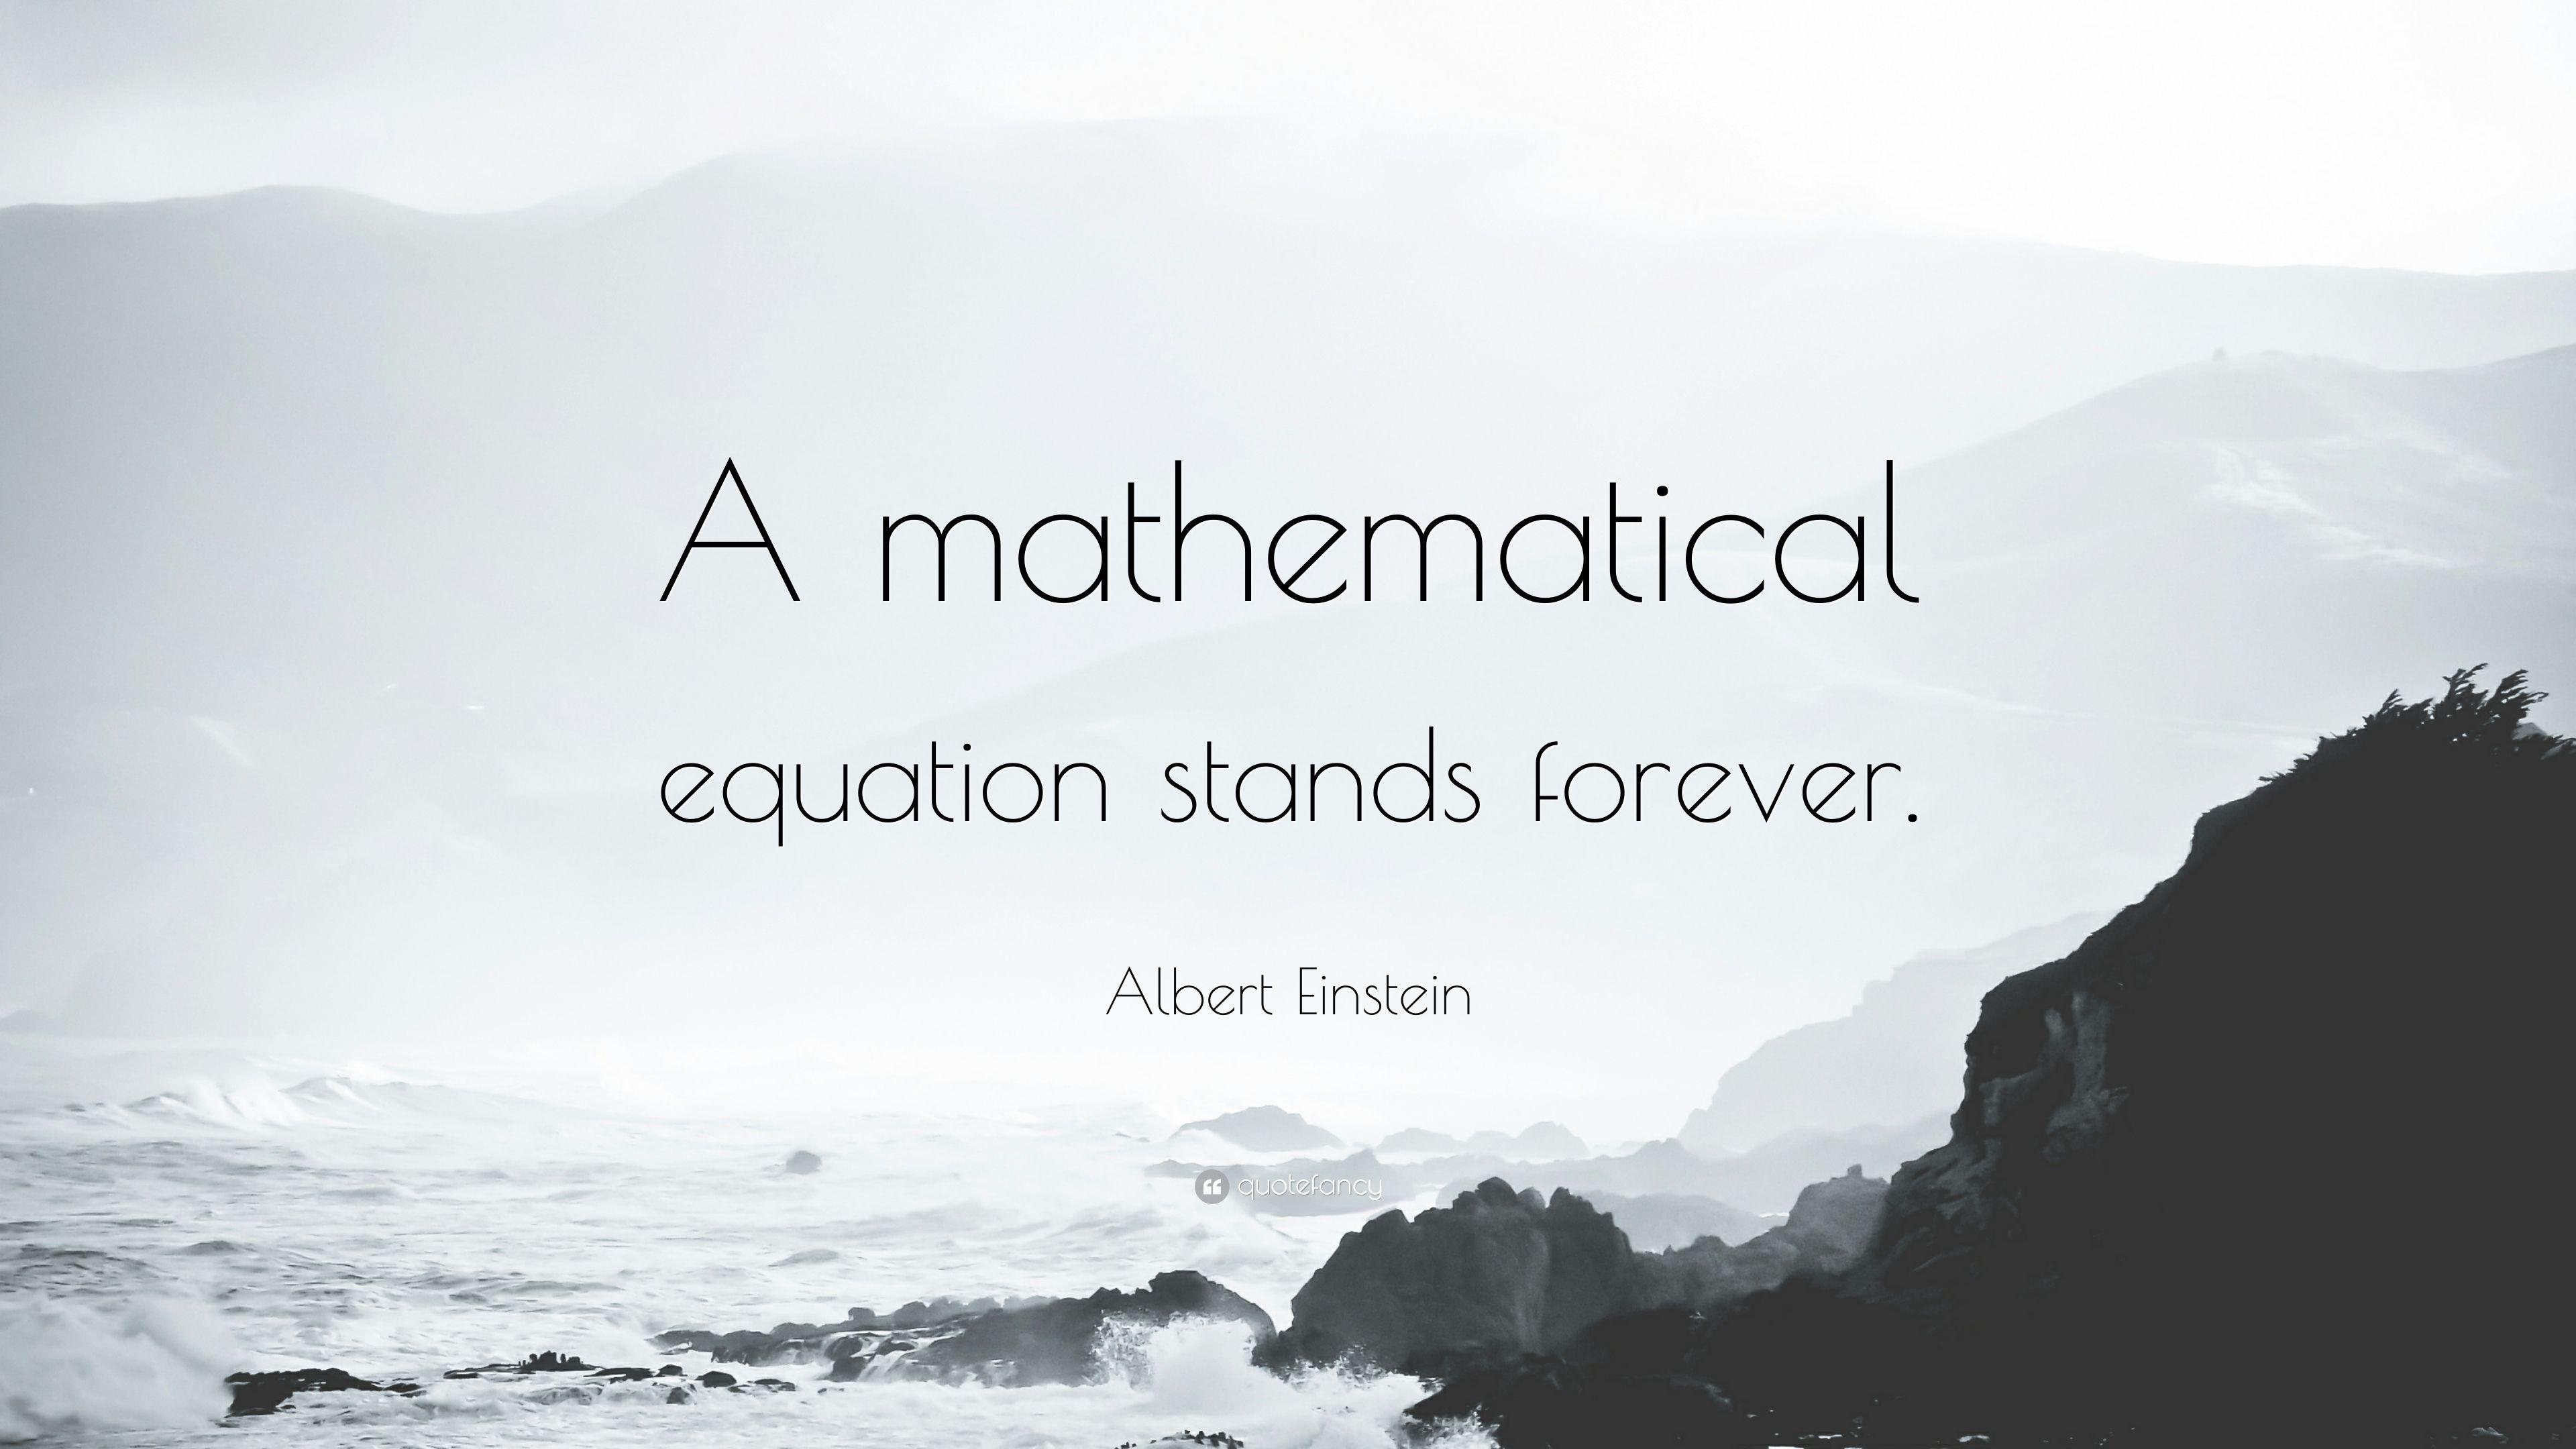 Albert Einstein Quote: “A mathematical equation stands forever.” 7